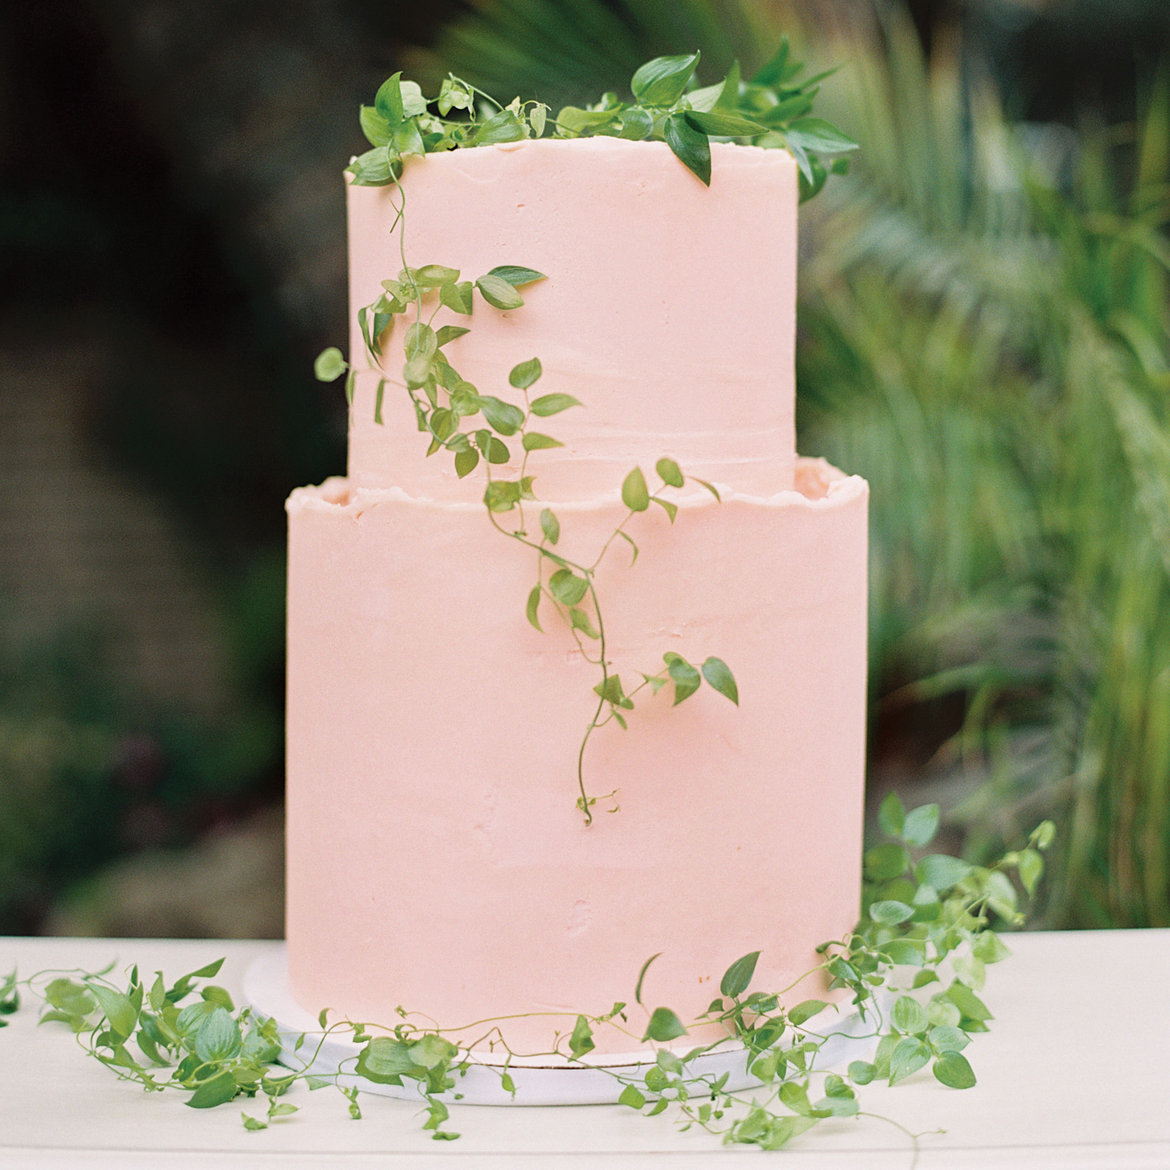 a light pink buttercream cake decorated with delicate greenery garlands on top and around is a cute idea for a dessert table